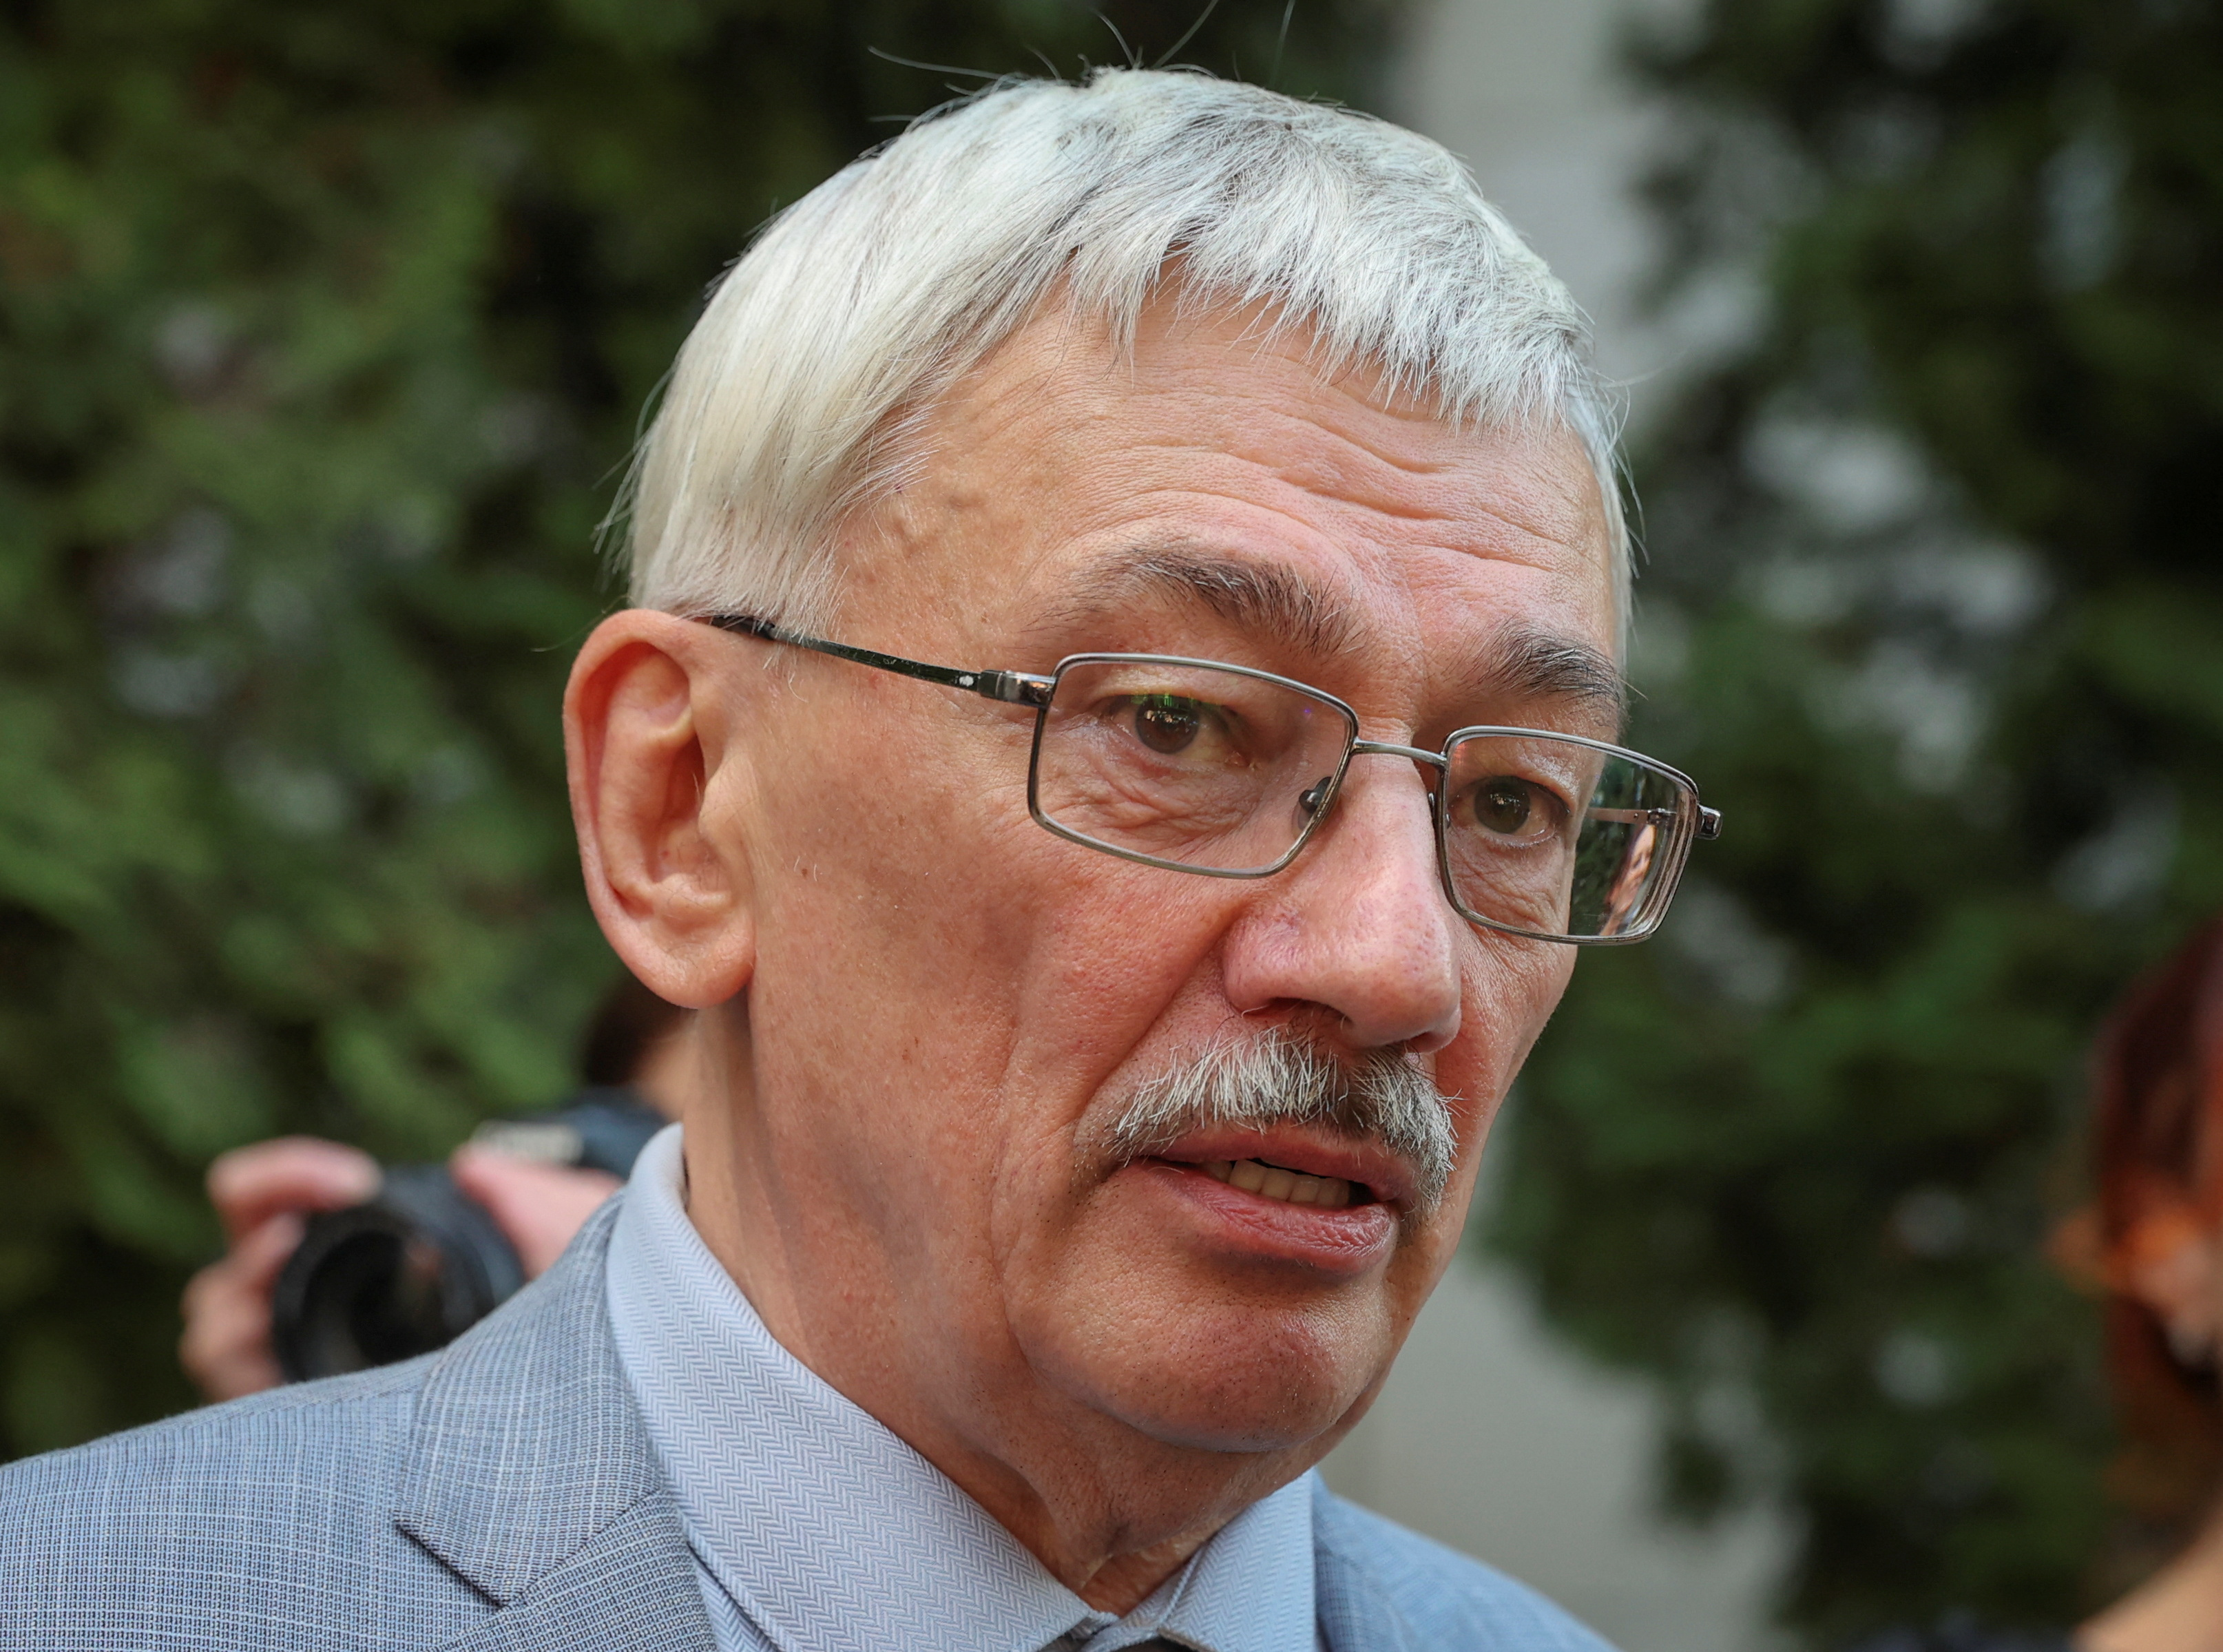 Veteran Russian rights campaigner Orlov goes on trial for discrediting army